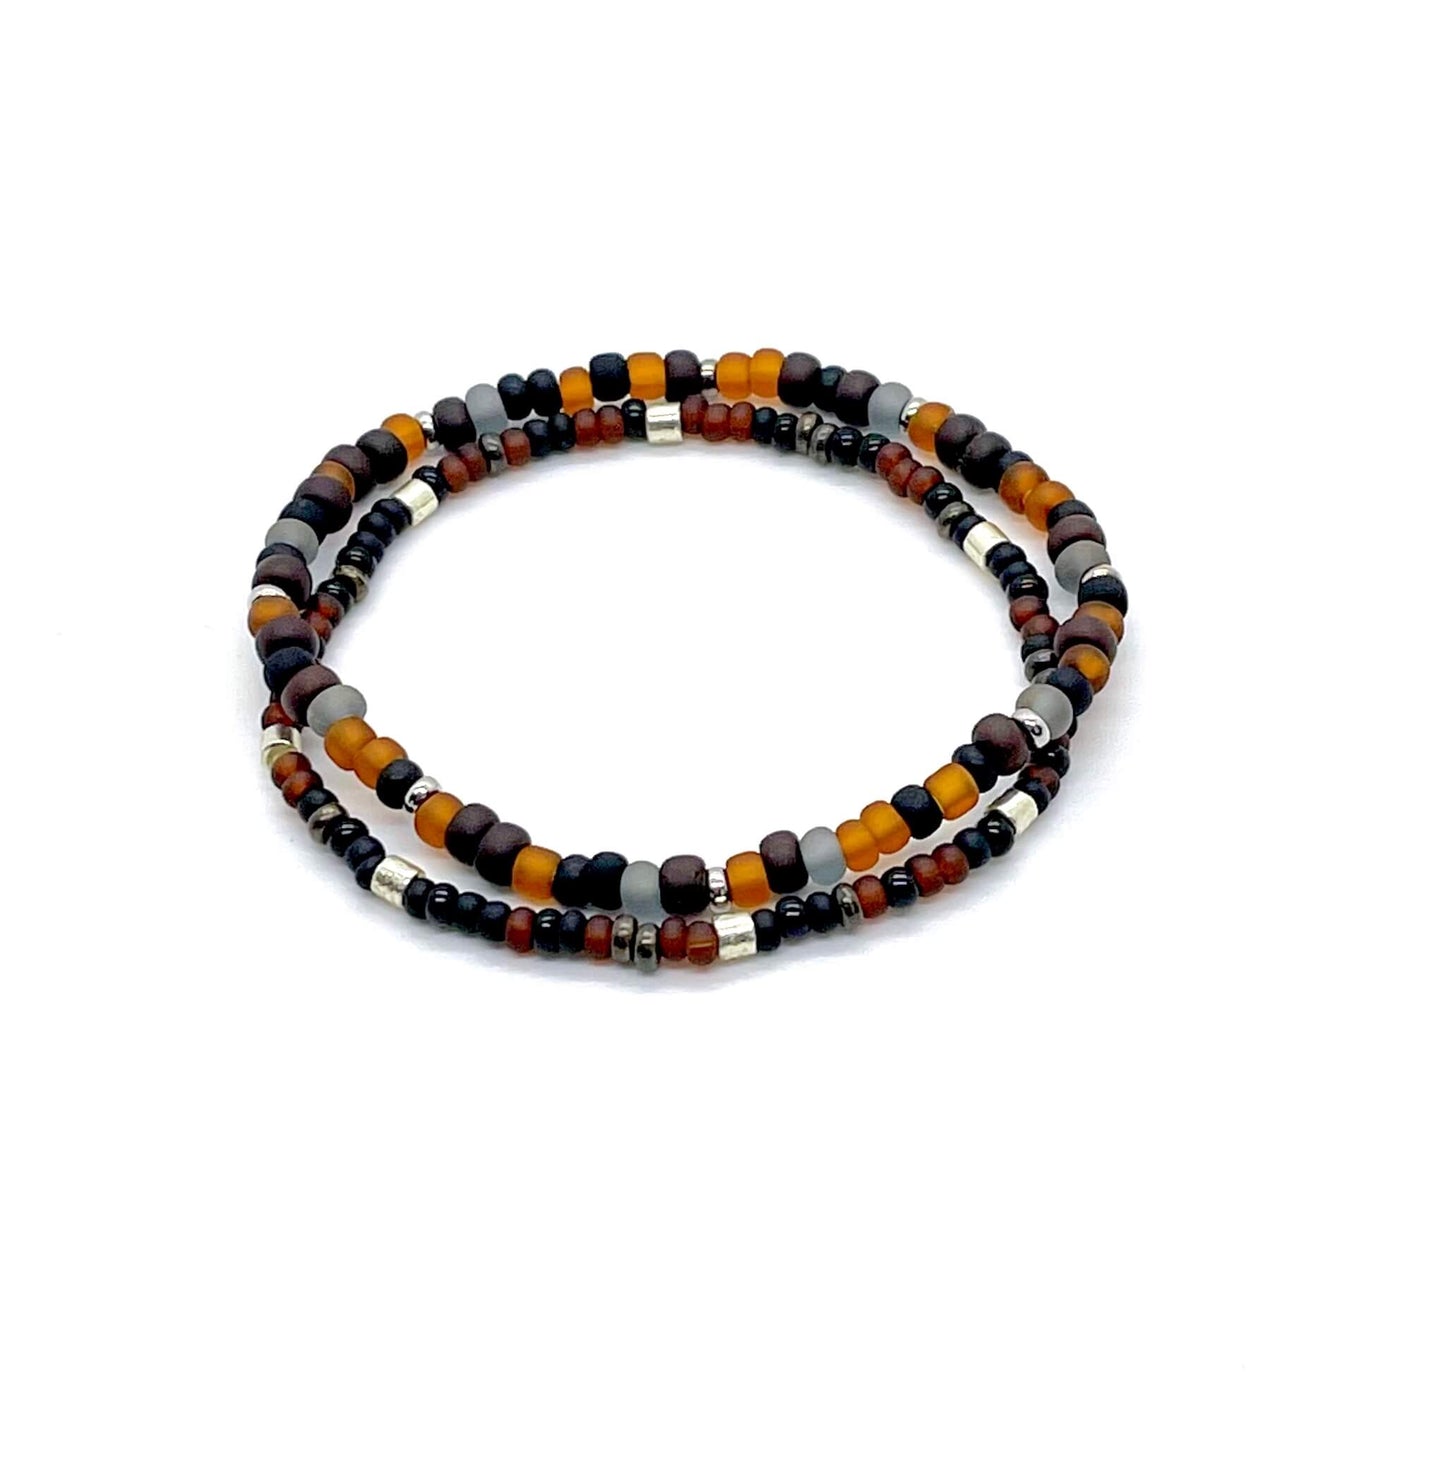 Men’s stackable beaded stretch bracelets with matte brown & amber seed beads or black, brown & silver tone seed beads.